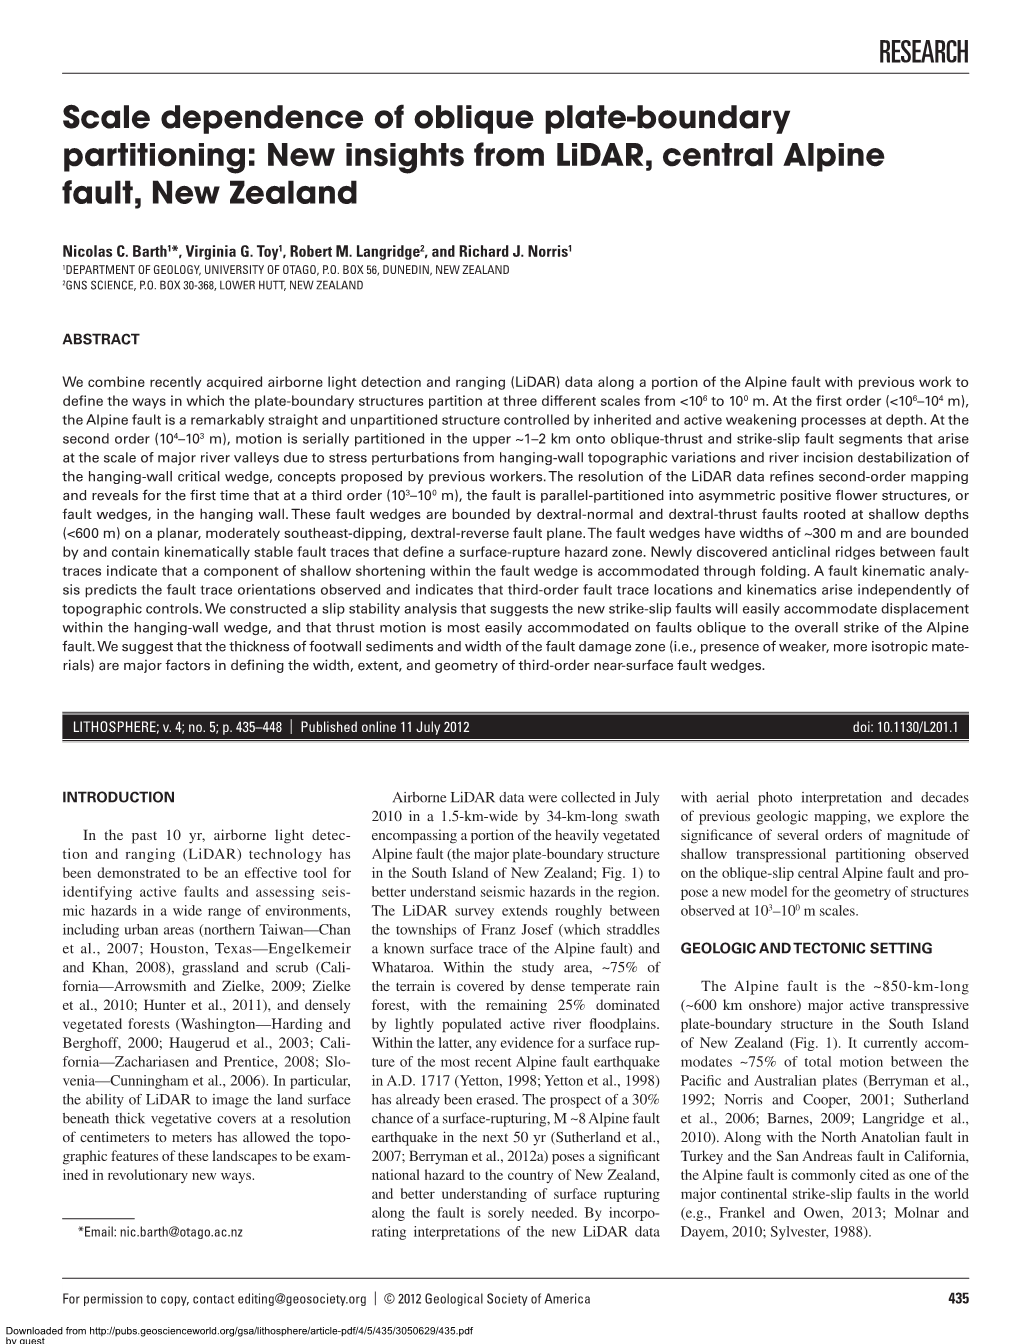 New Insights from Lidar, Central Alpine Fault, New Zealand